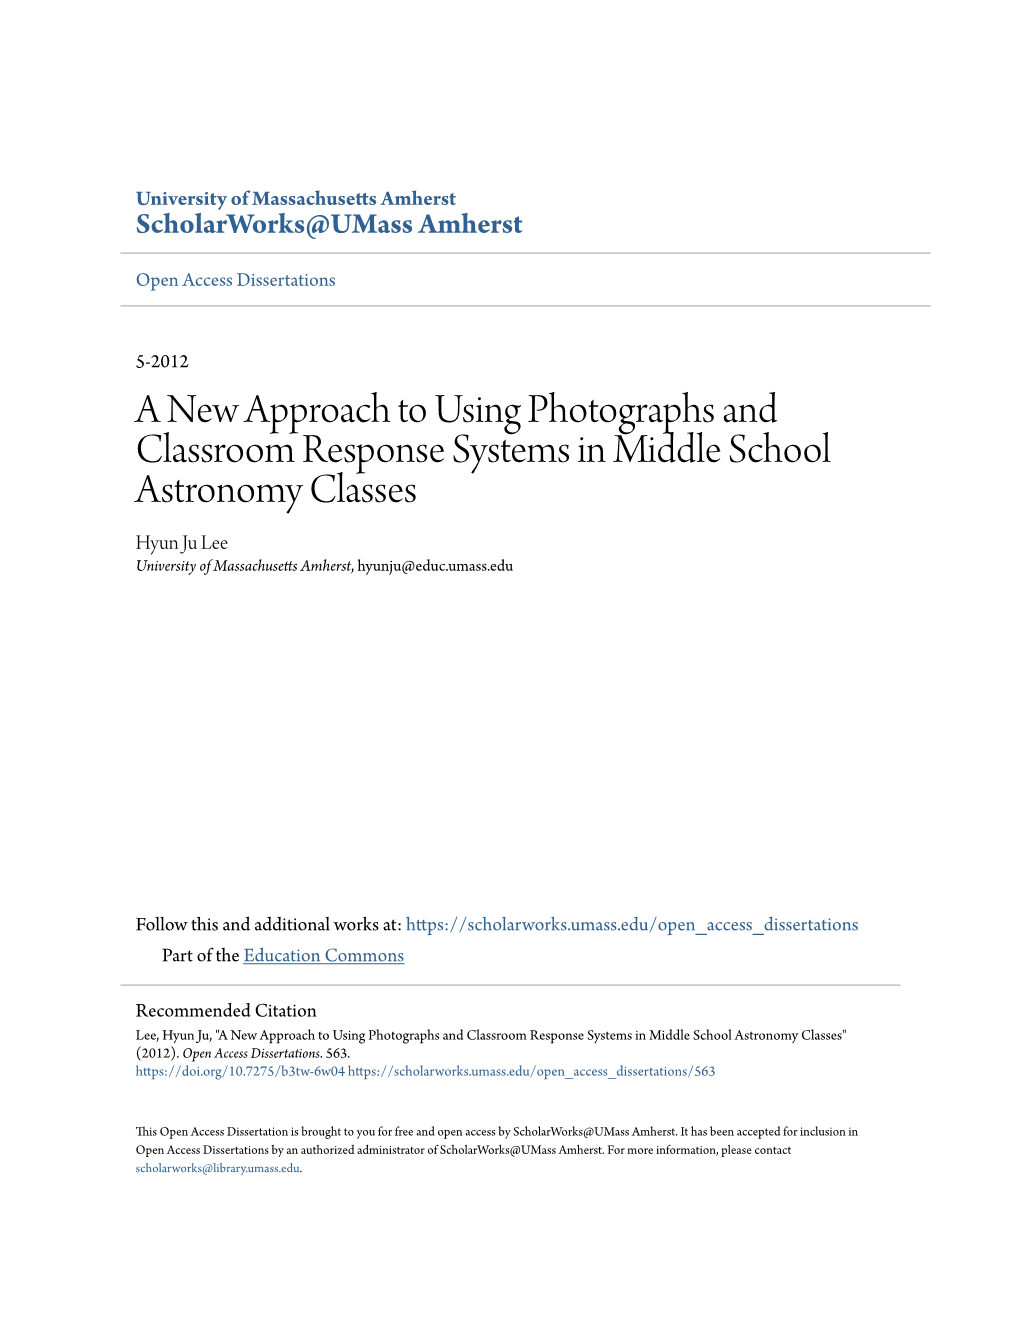 A New Approach to Using Photographs and Classroom